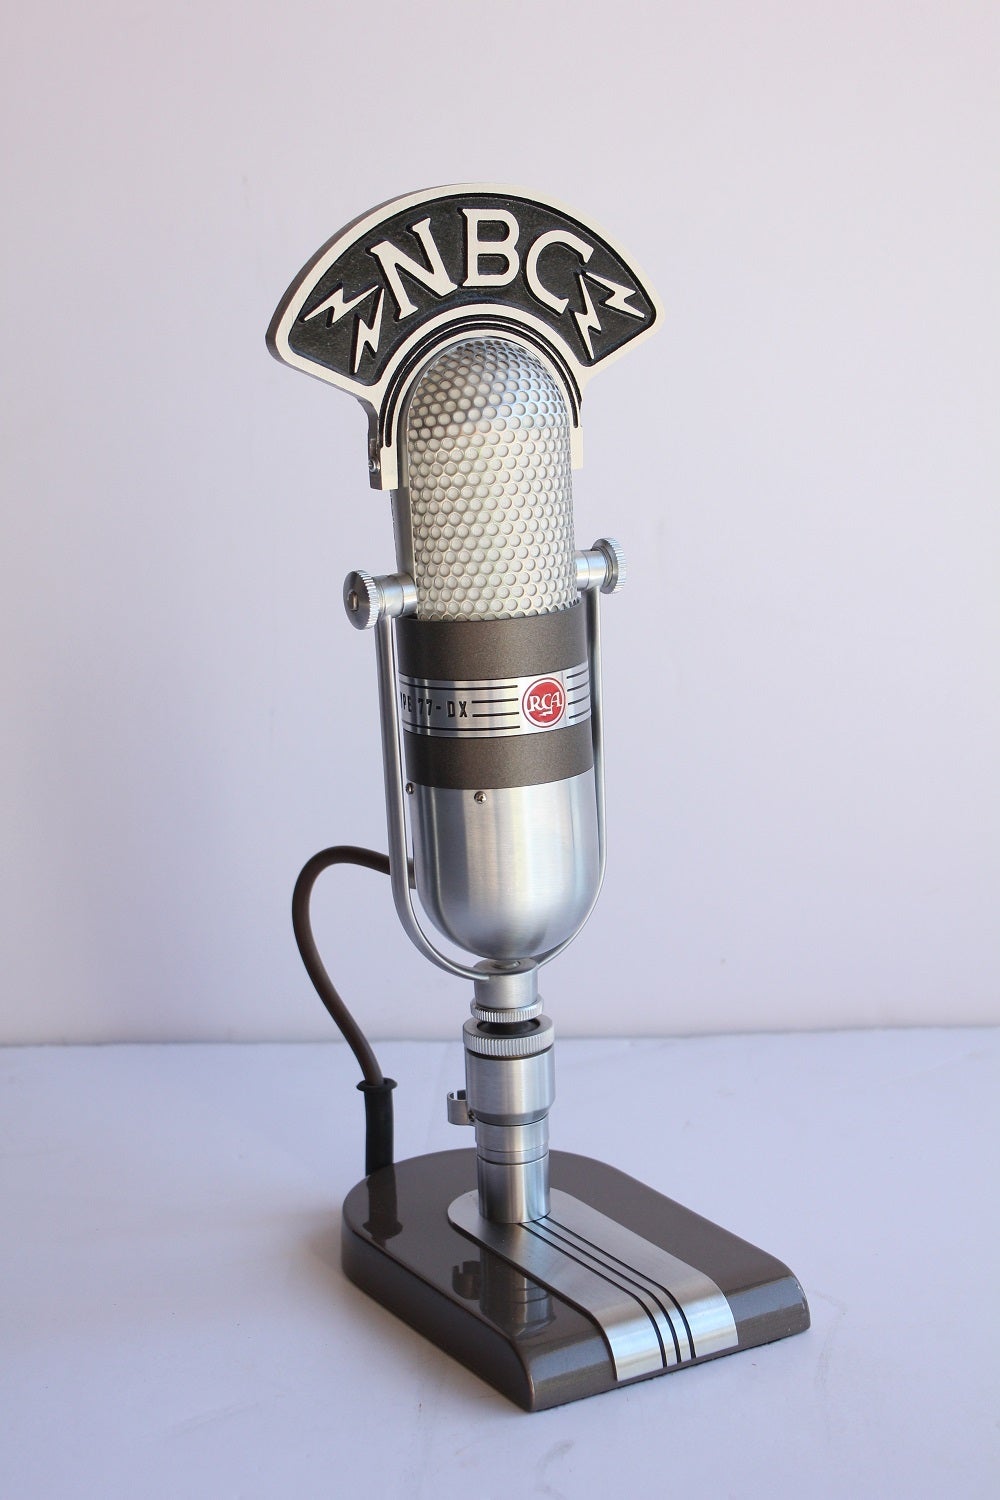 1950's Original RCA Microphone. NBC sign is new. The Art Deco style stand is new also.